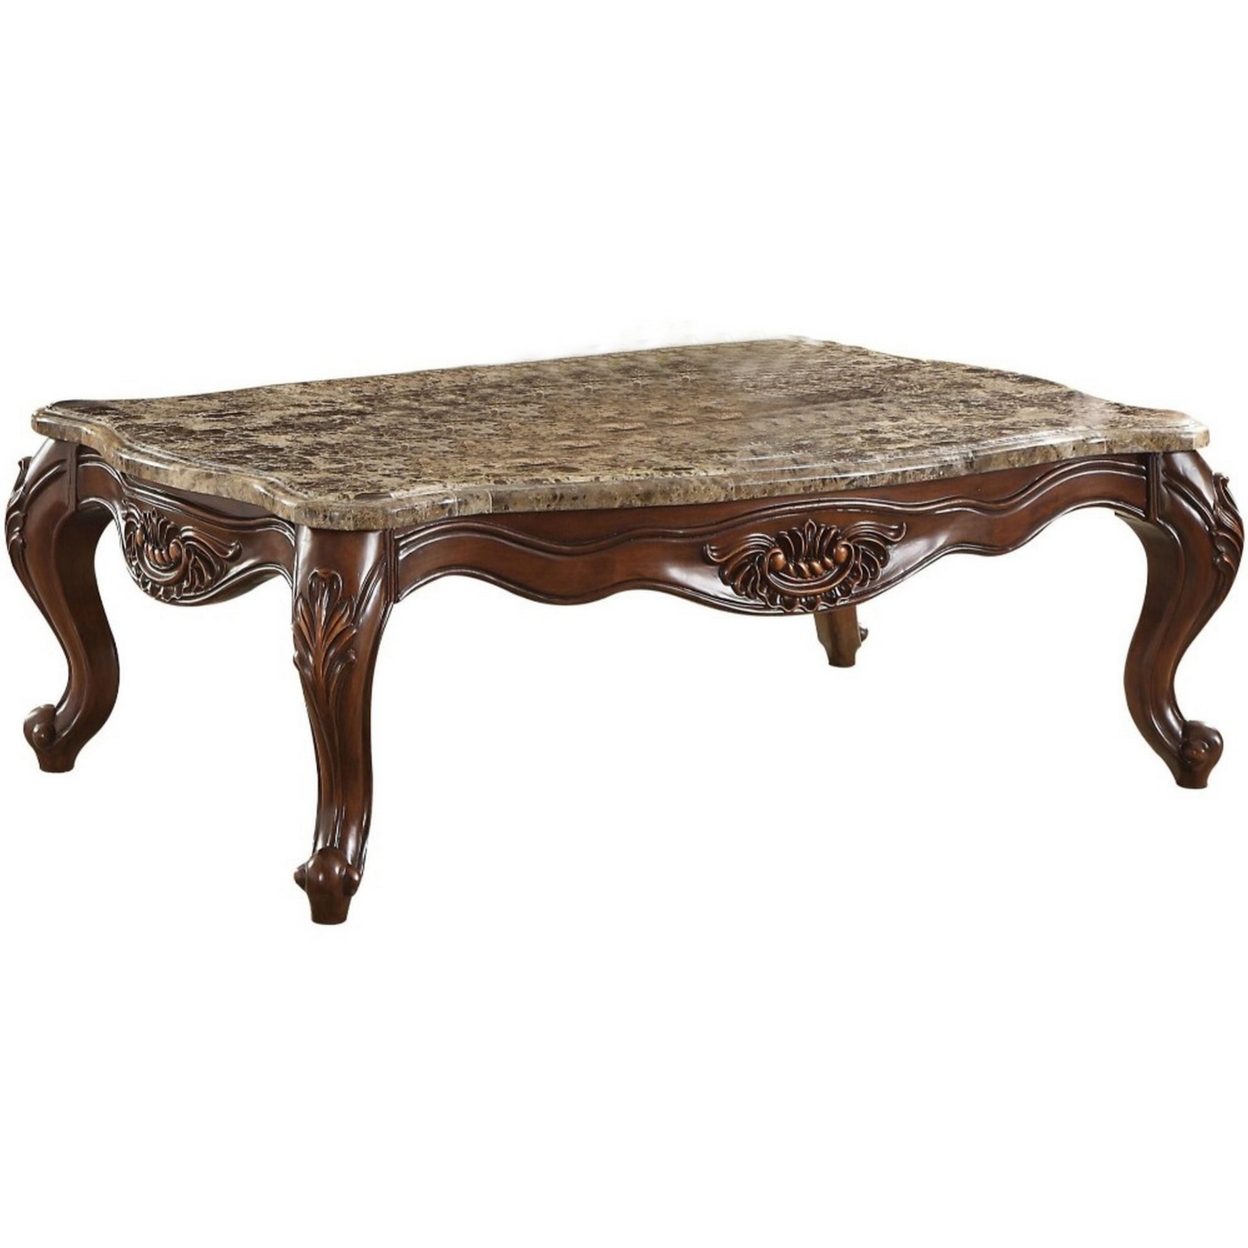 Traditional Style Rectangular Marble And Wooden Coffee Table, Brown- Saltoro Sherpi